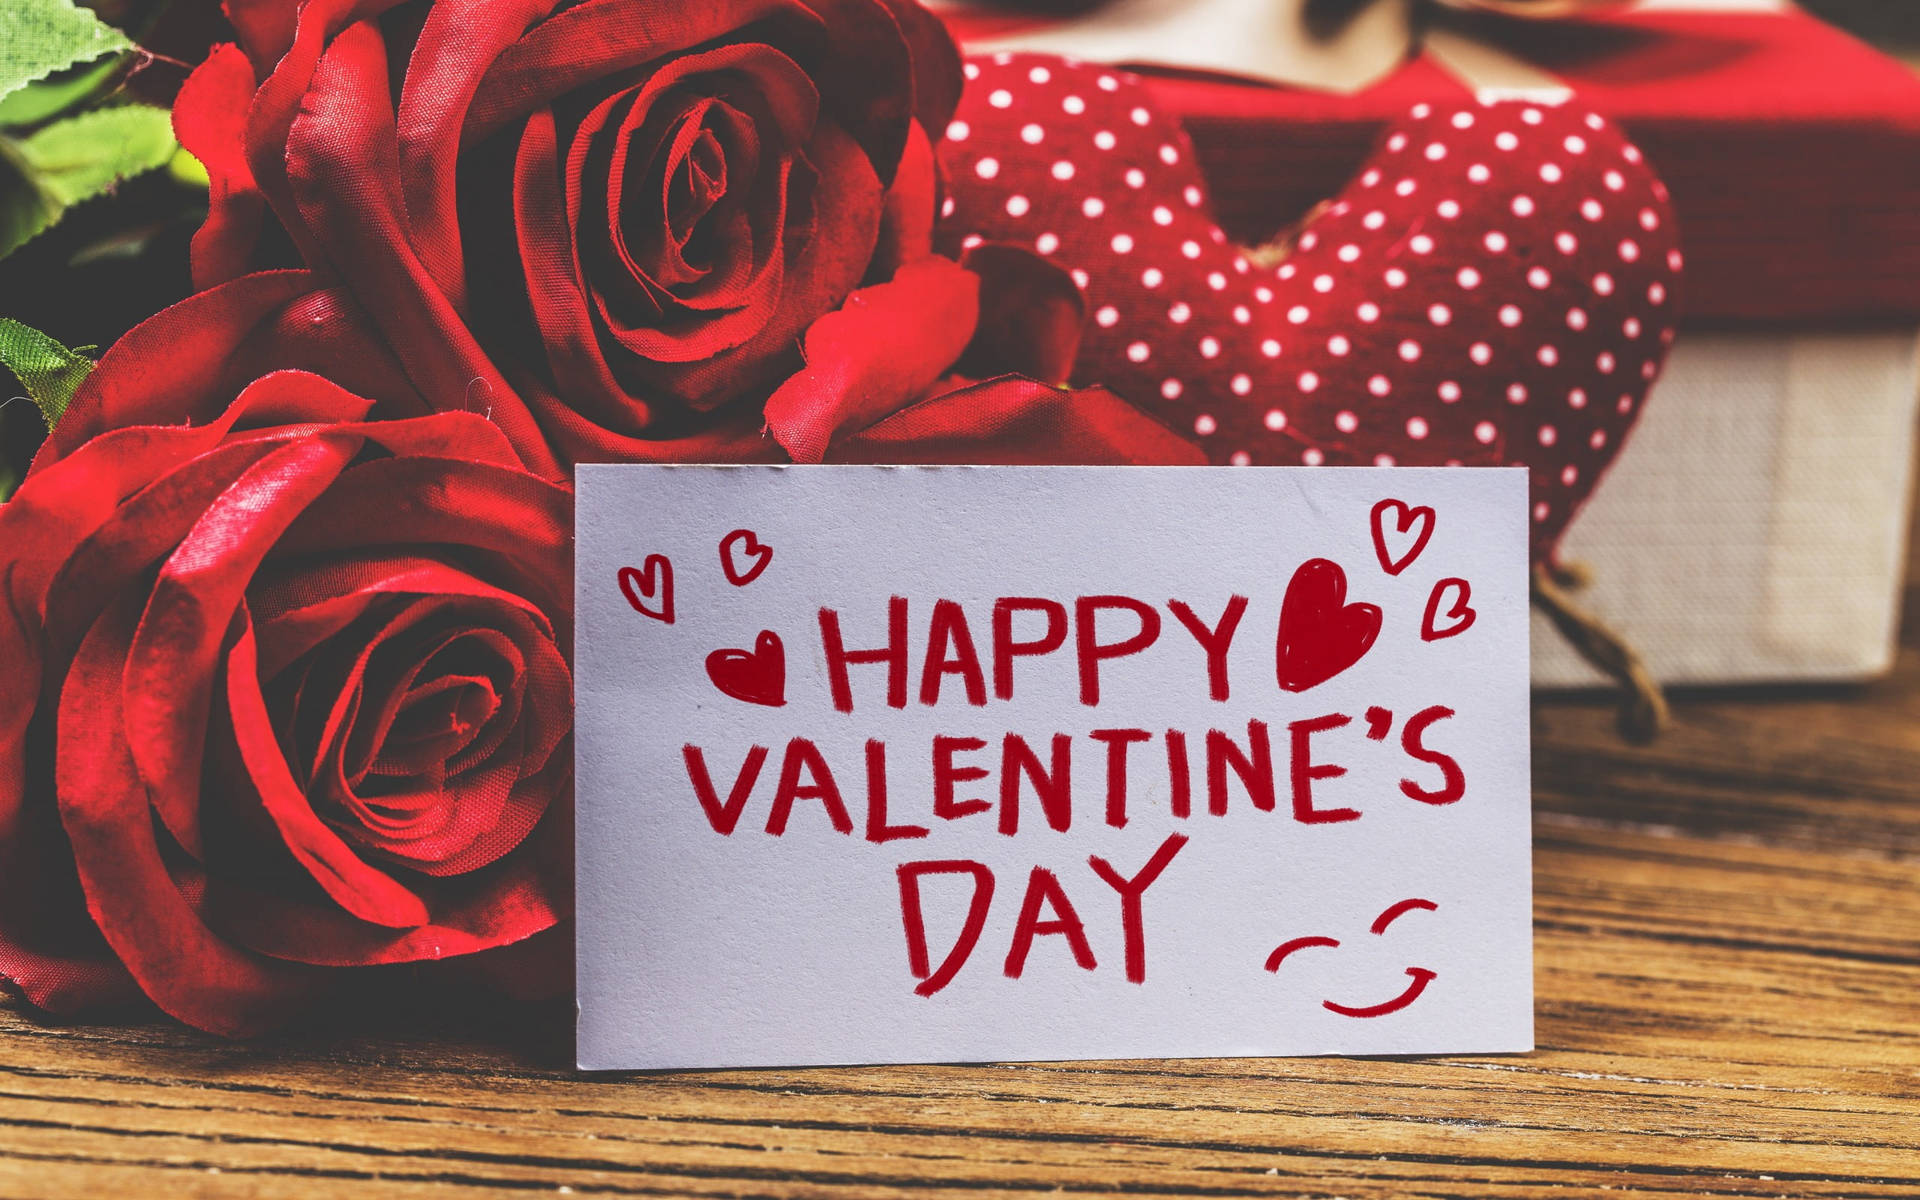 Happy Valentine’s Day Card With Roses Wallpaper